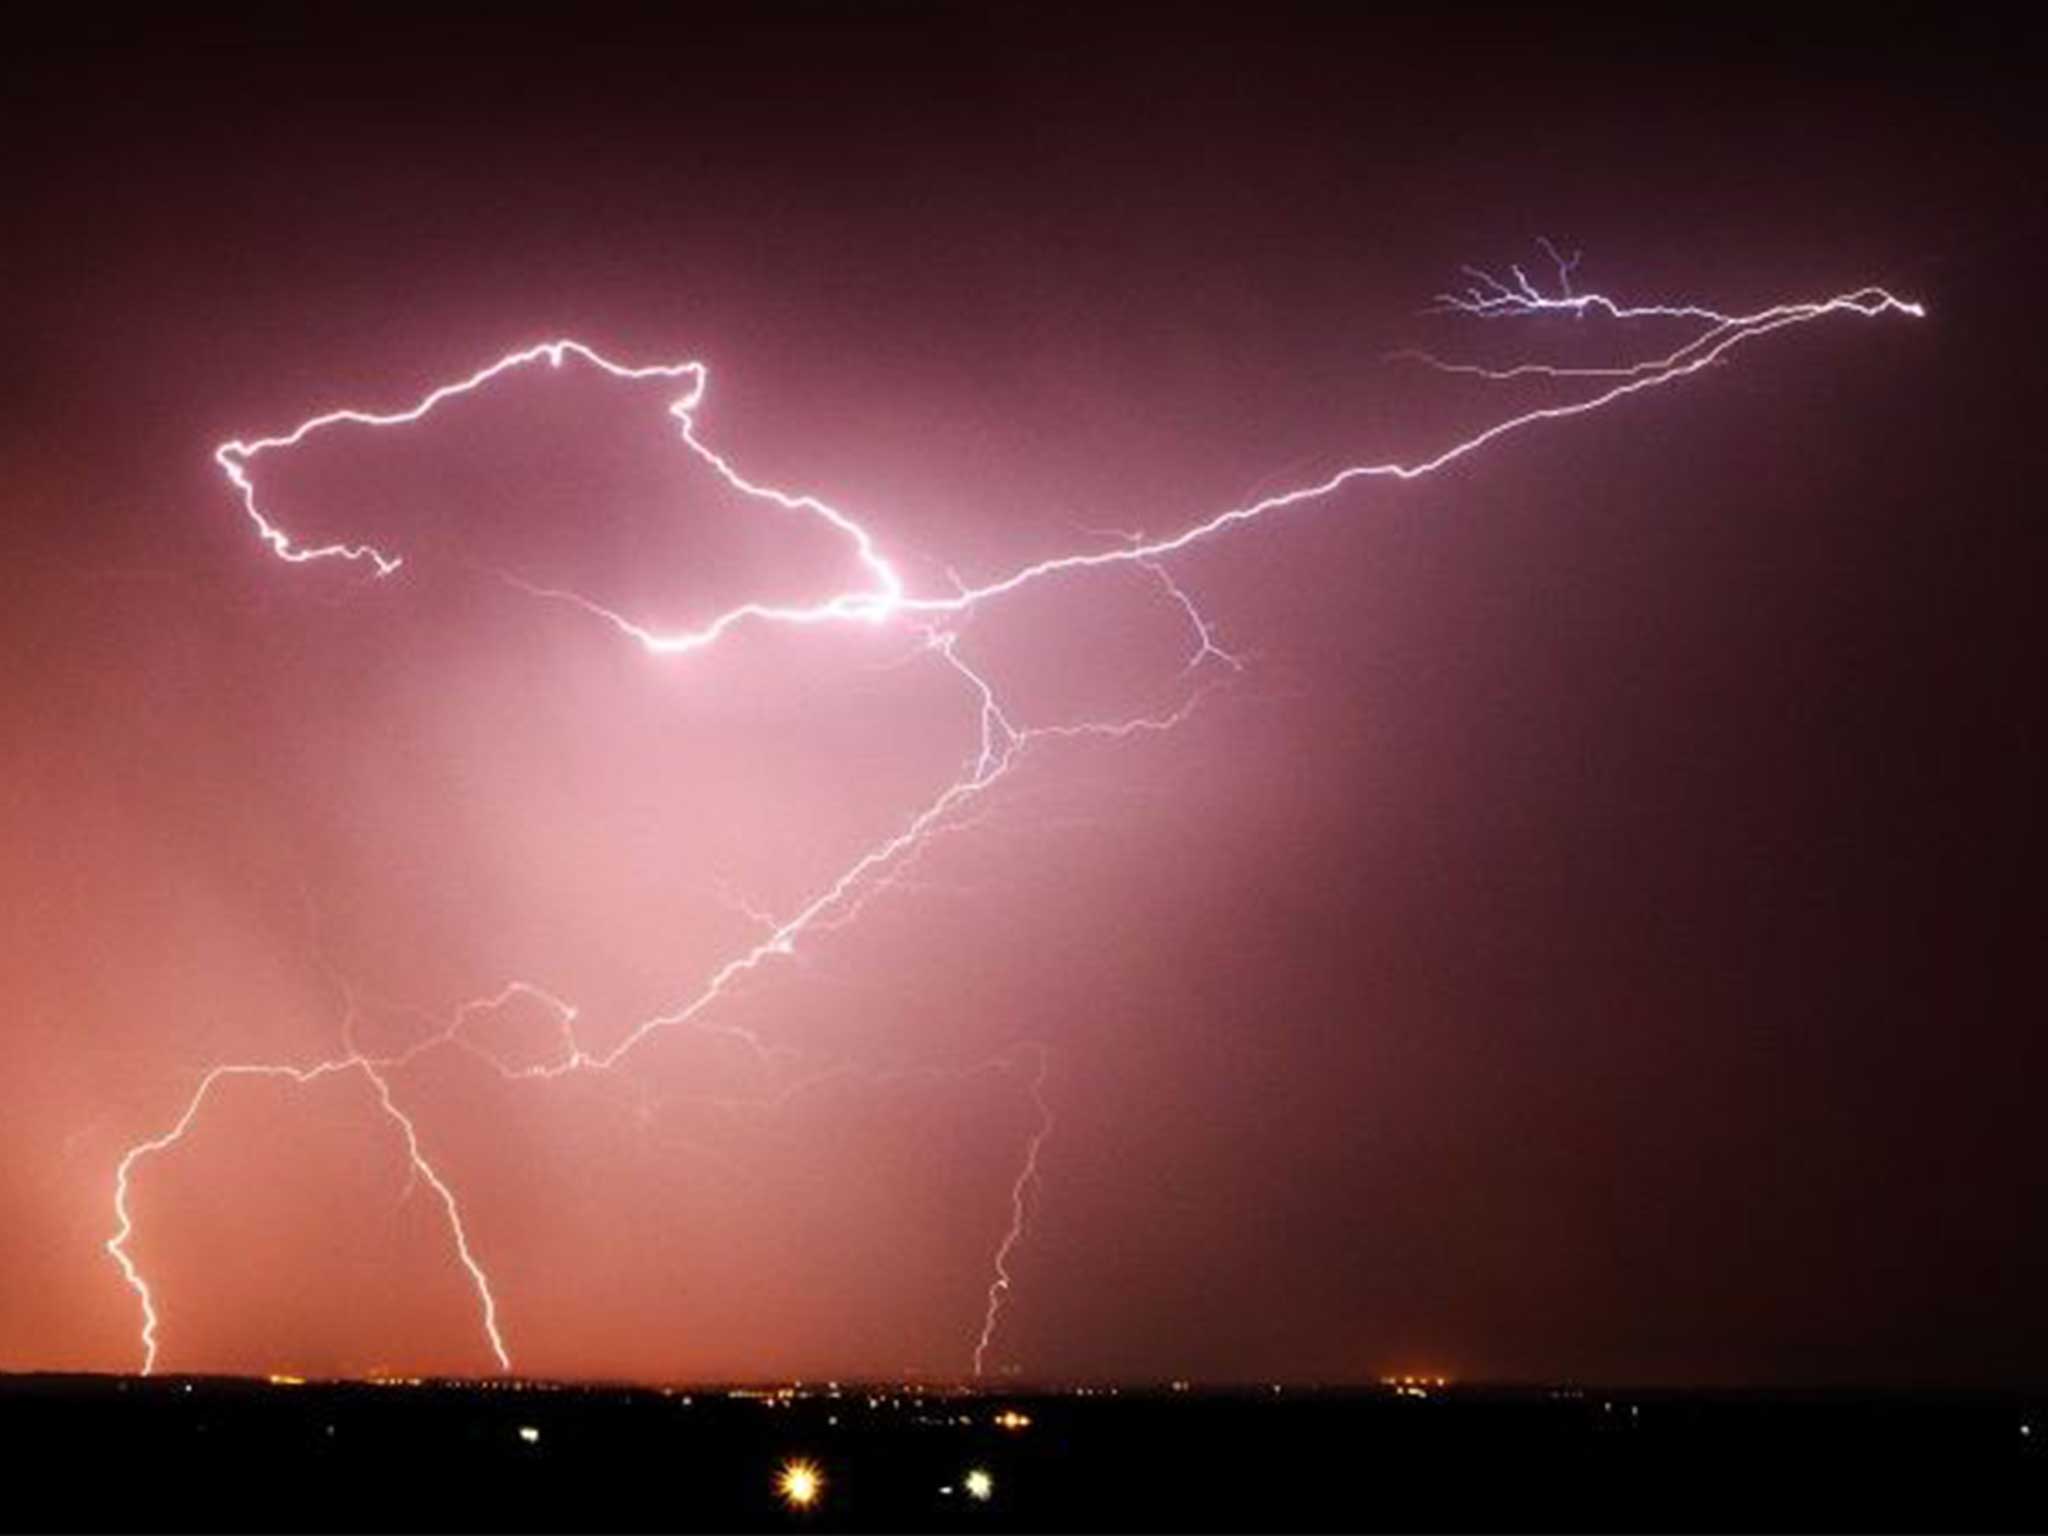 Lightning strikes over the Vale of Belvoir, Leicestershire as the UK is now braced for torrential downpours and storms that will could cause flash flooding across large parts of England and Wales